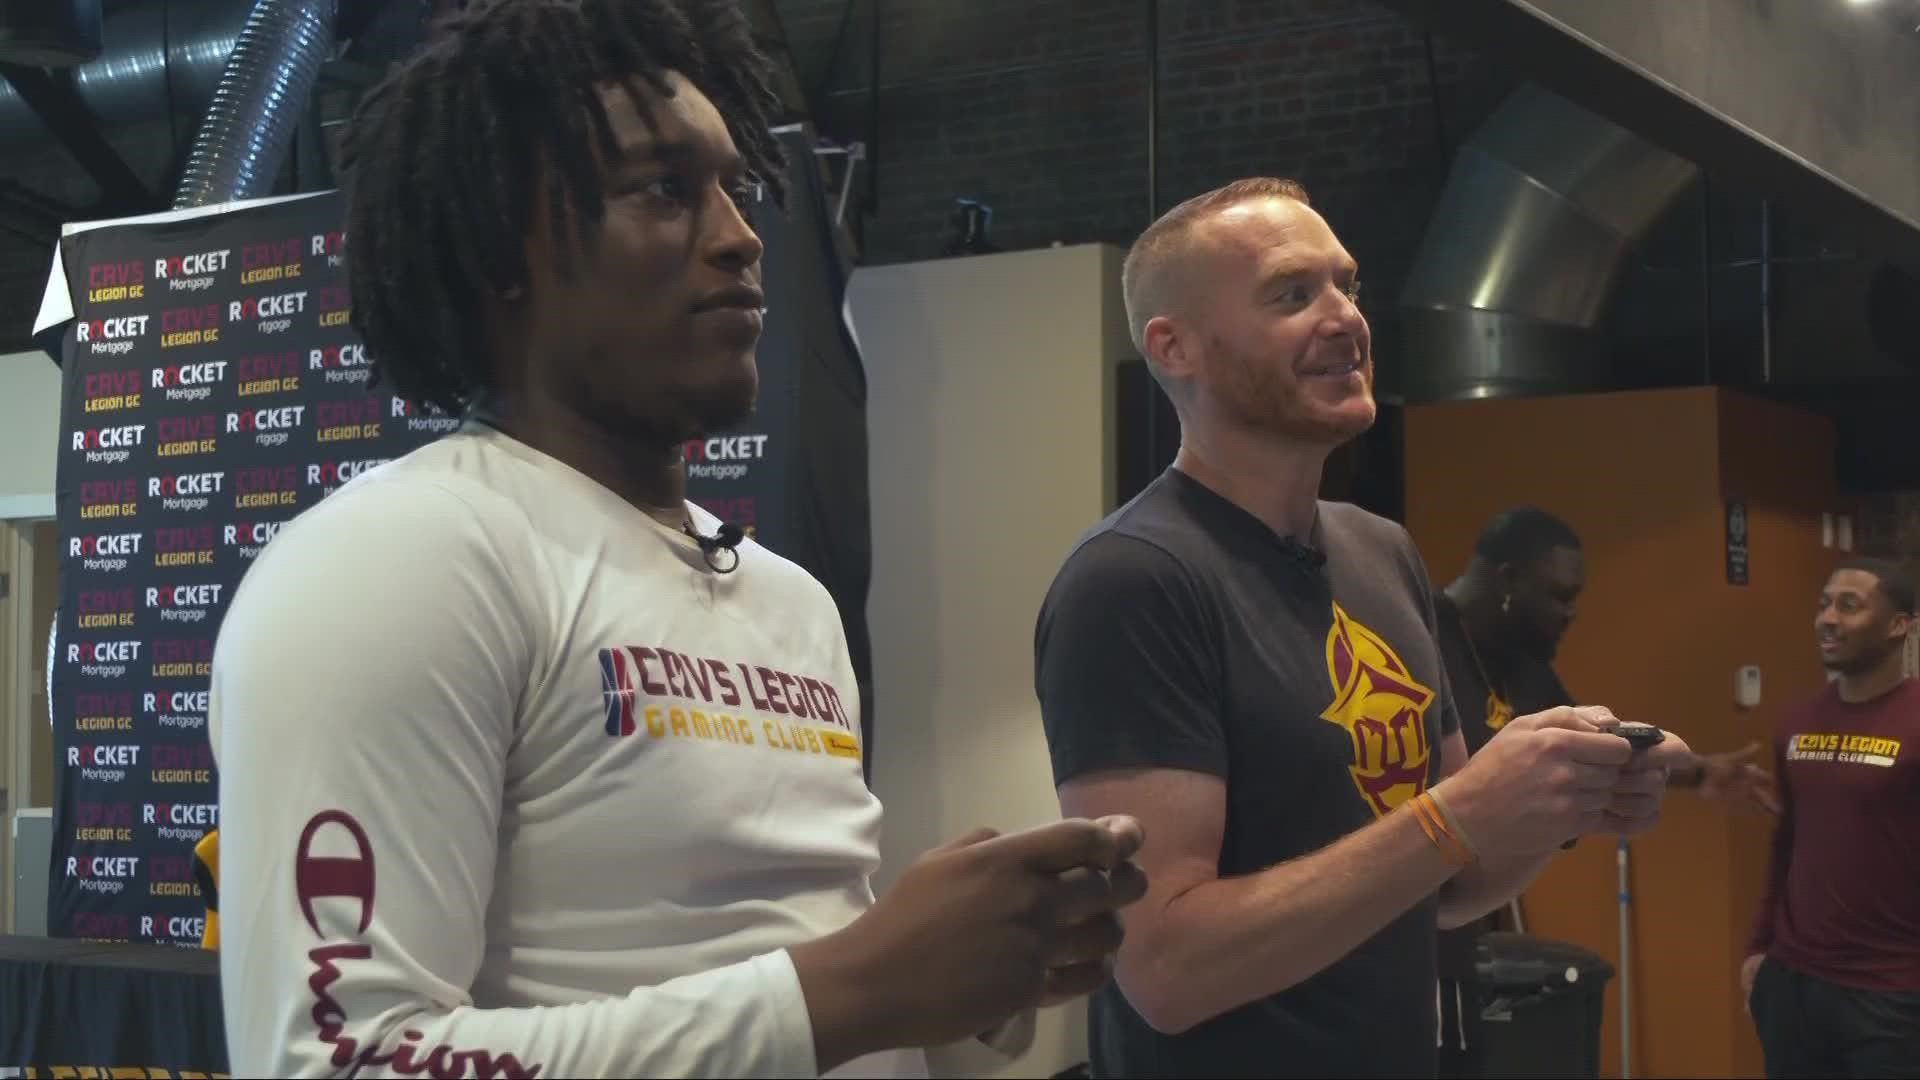 We Clevelanders love our local sports team, but there's a team in Cleveland you may not have heard of: the Cavs Legion eSports team. 3News' Mike Polk shares more.